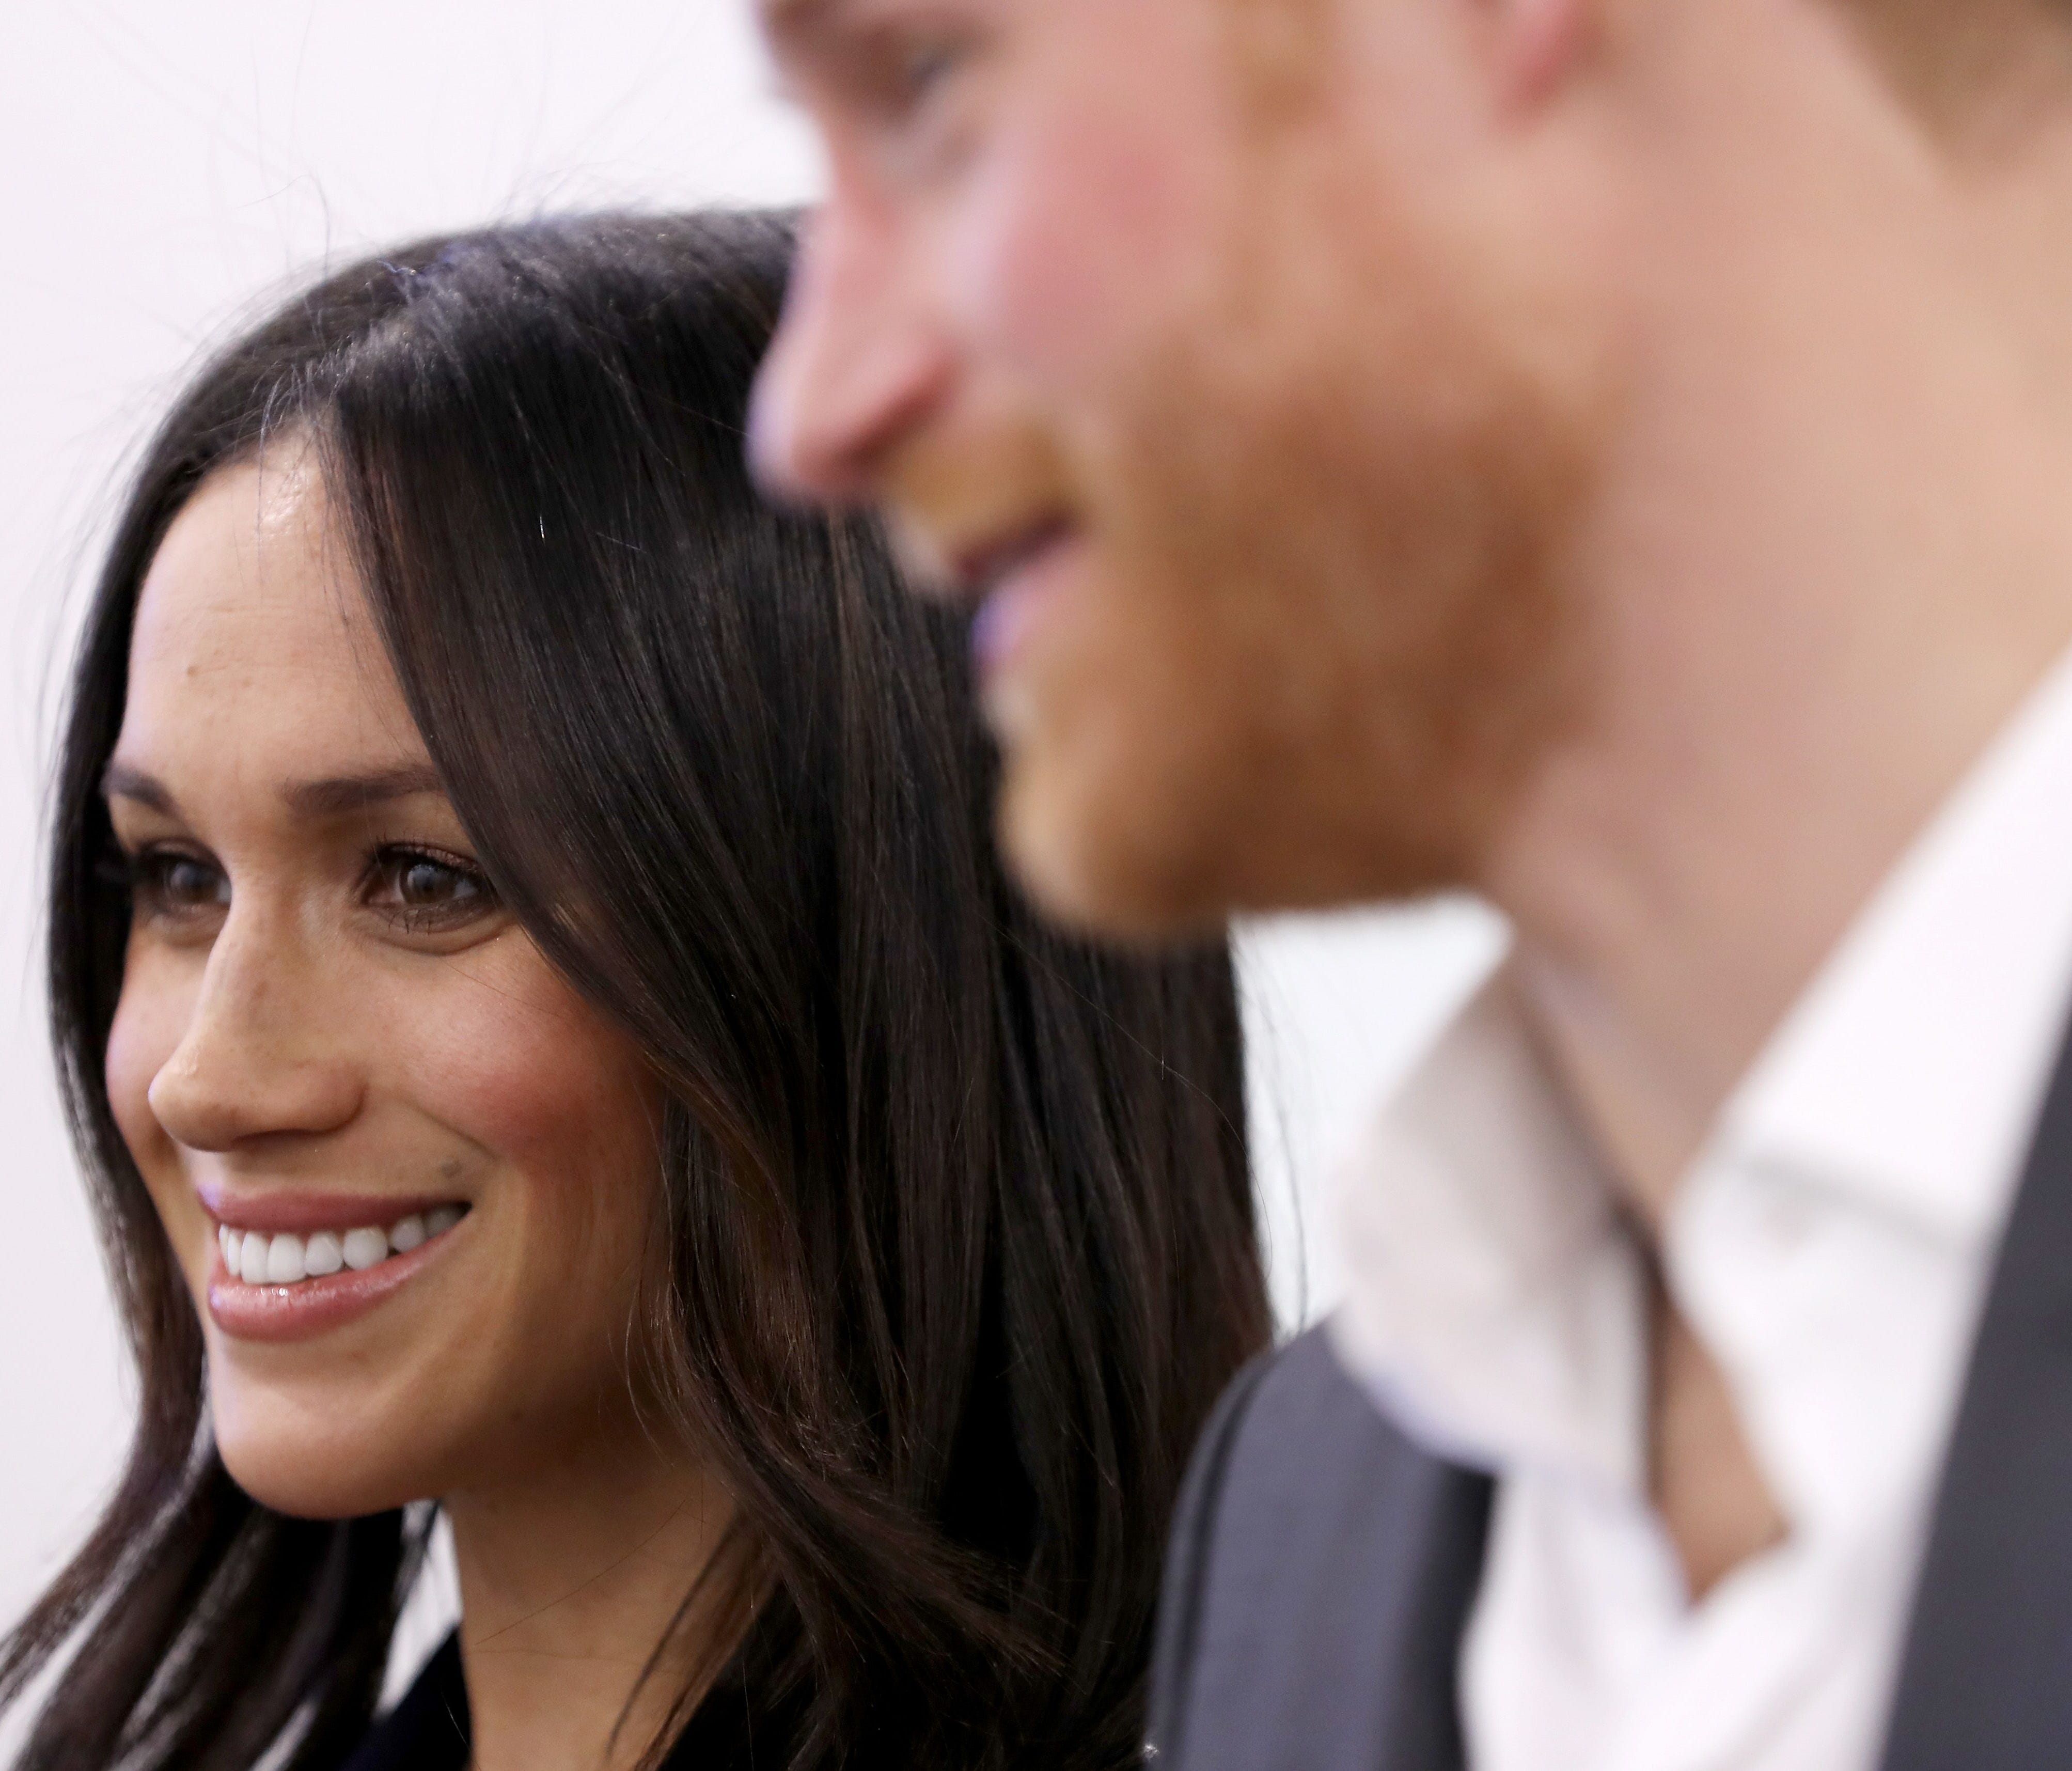 Prince Harry and Meghan Markle meet with panelists and beneficiaries as they attend the first annual Royal Foundation Forum held at Aviva on Feb. 28, 2018 in London, England.